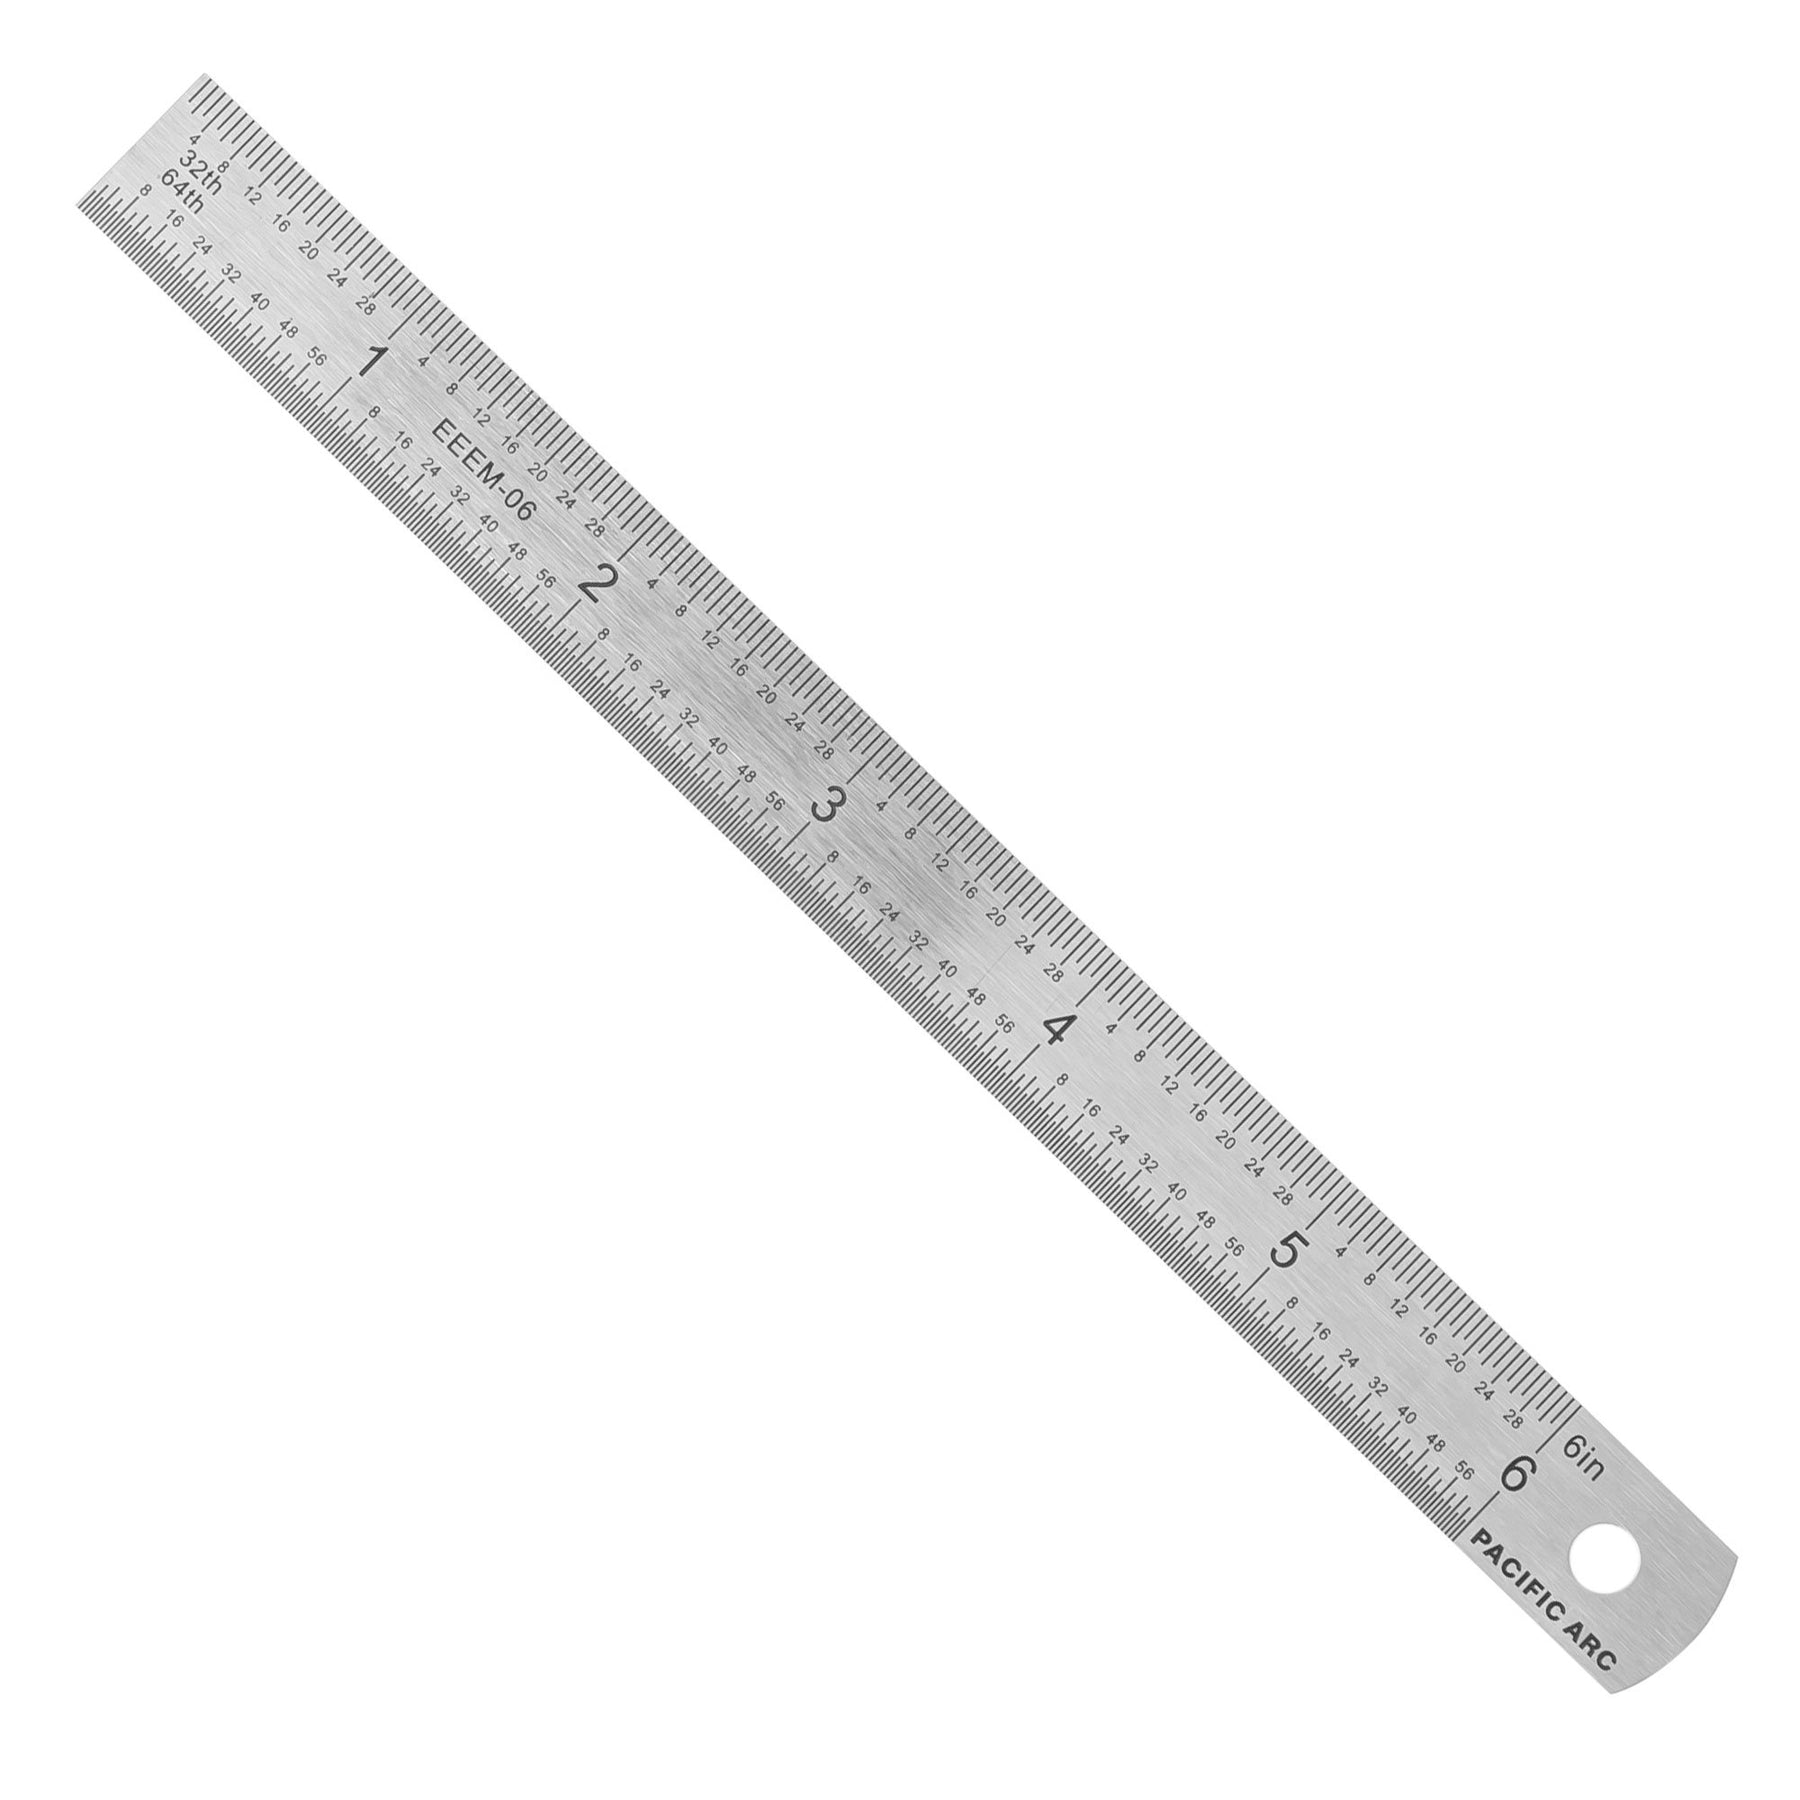 6'' / 8 / 12 Scale Ruler Small Large Measure Rule Metal Stainless Steel  30cm